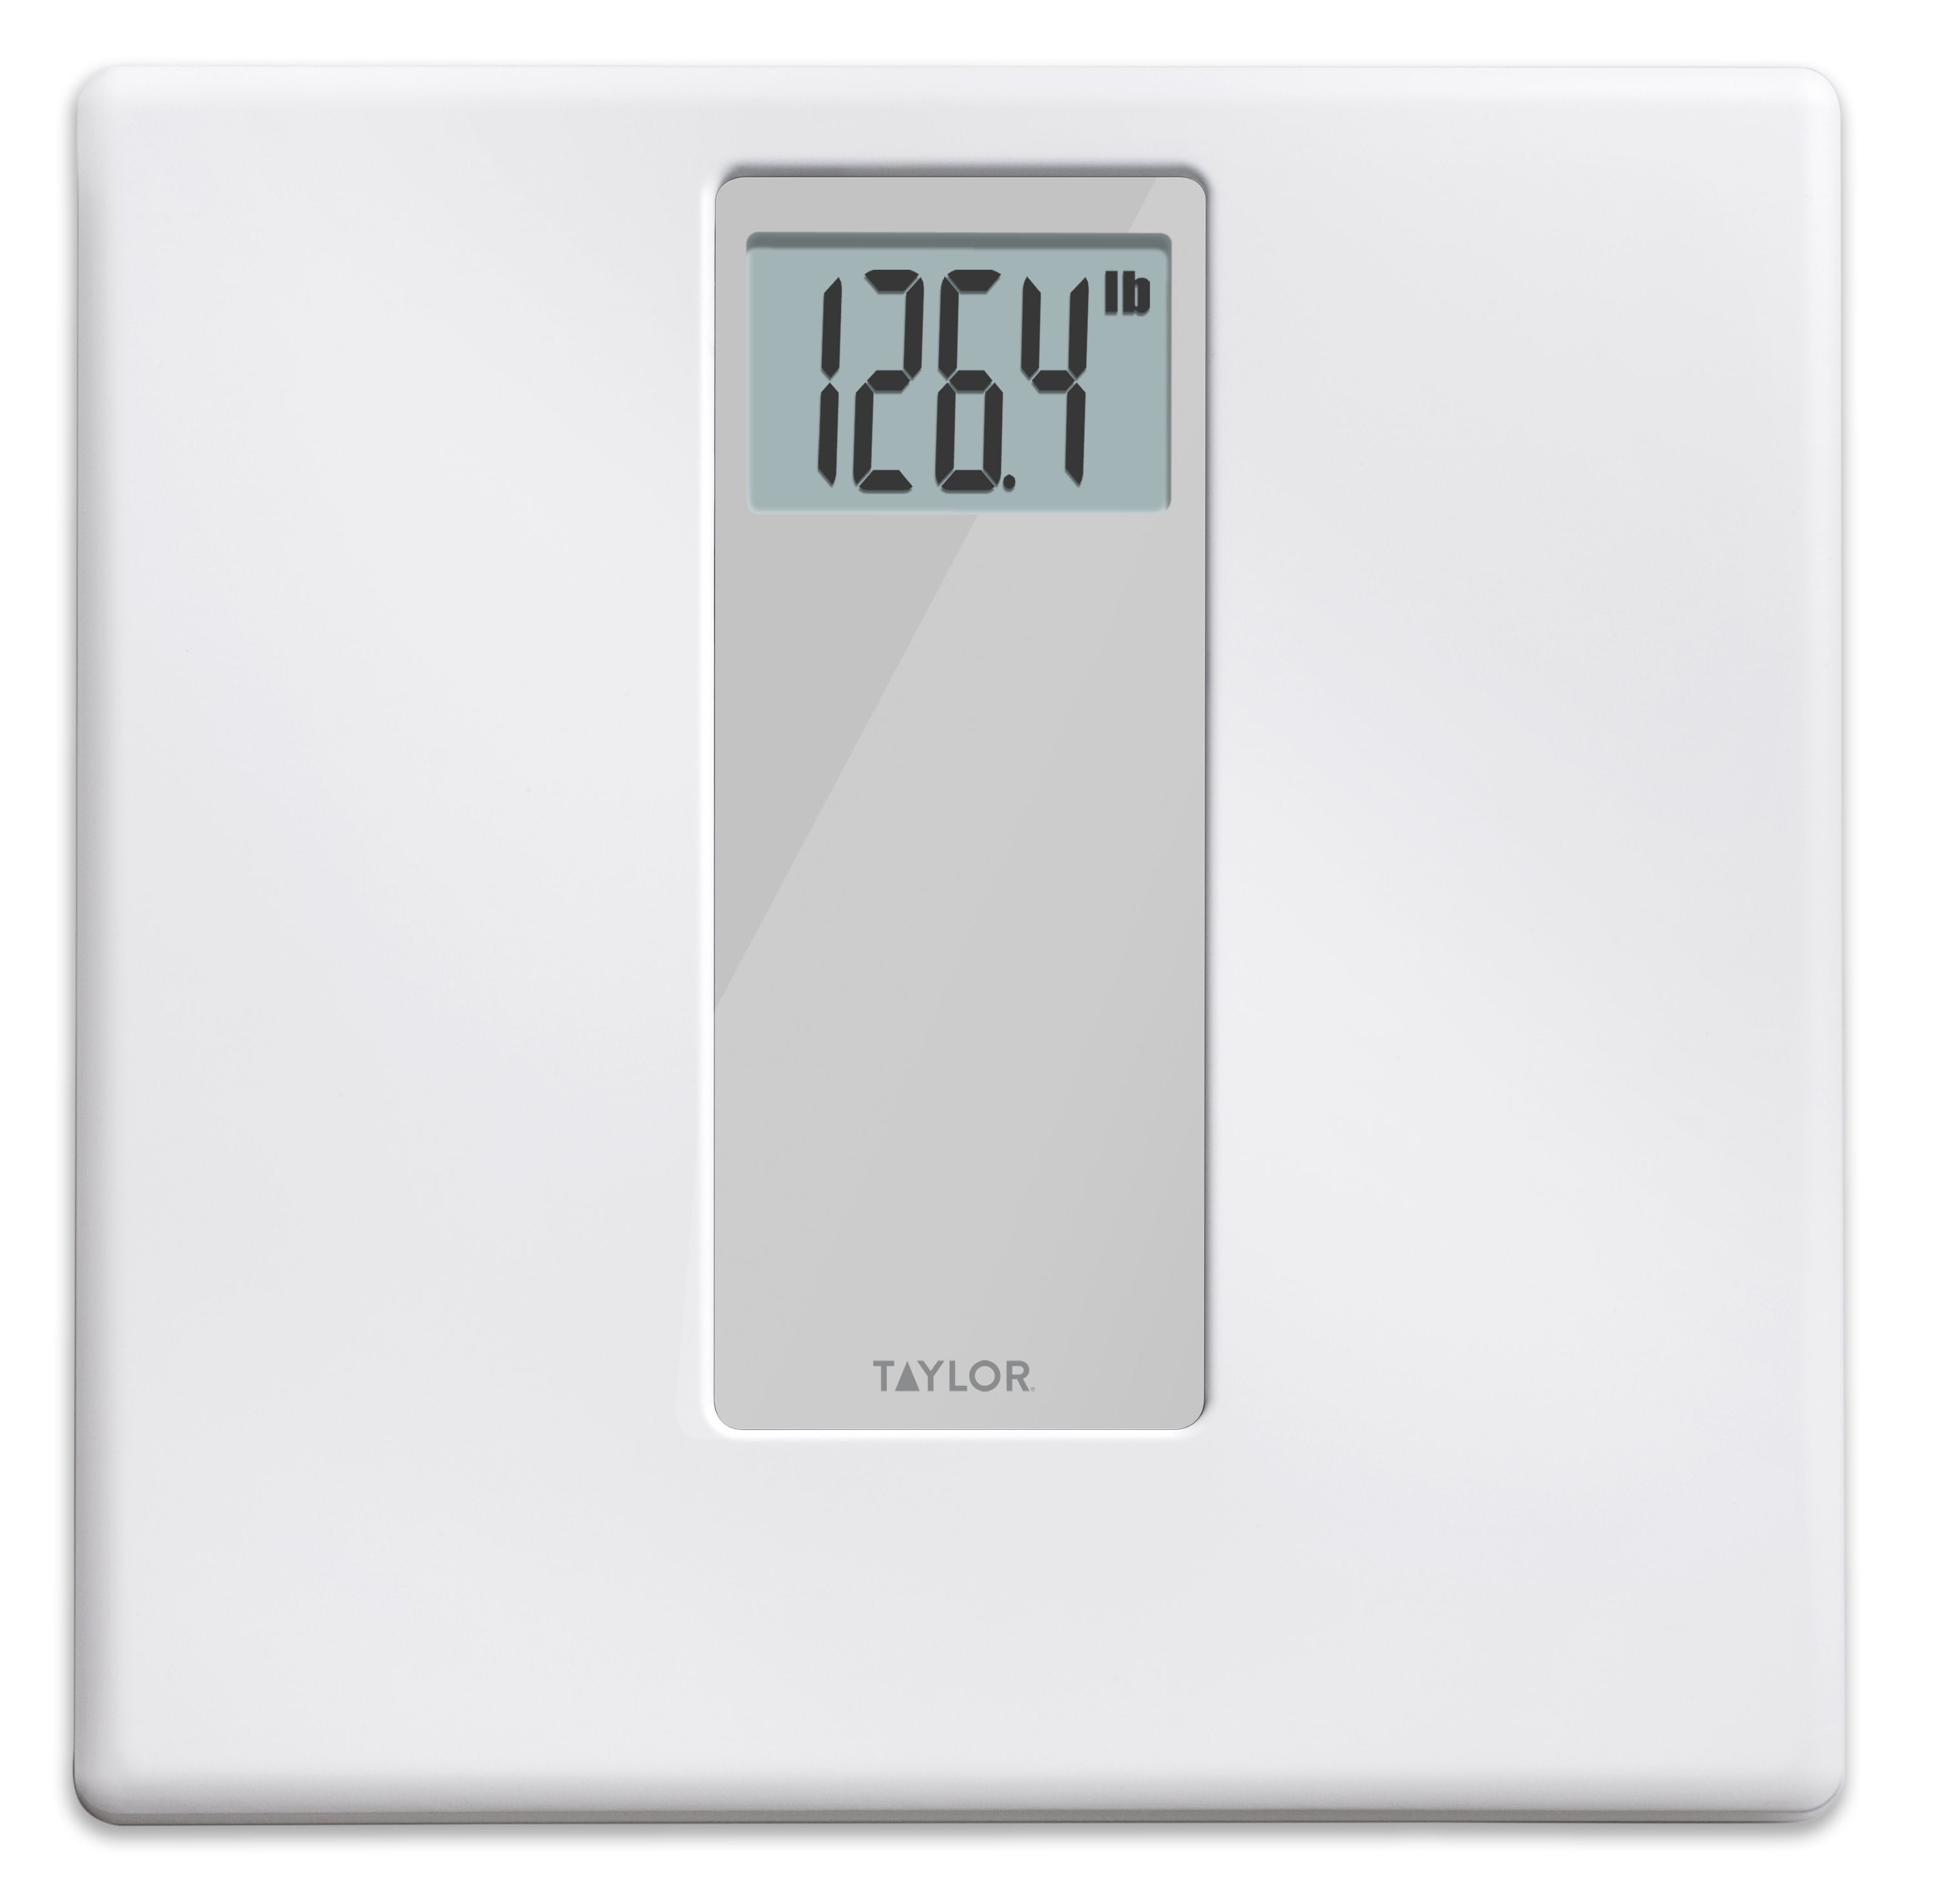 Mainstays Analog Bathroom Scale, Dial Body Scale, White 